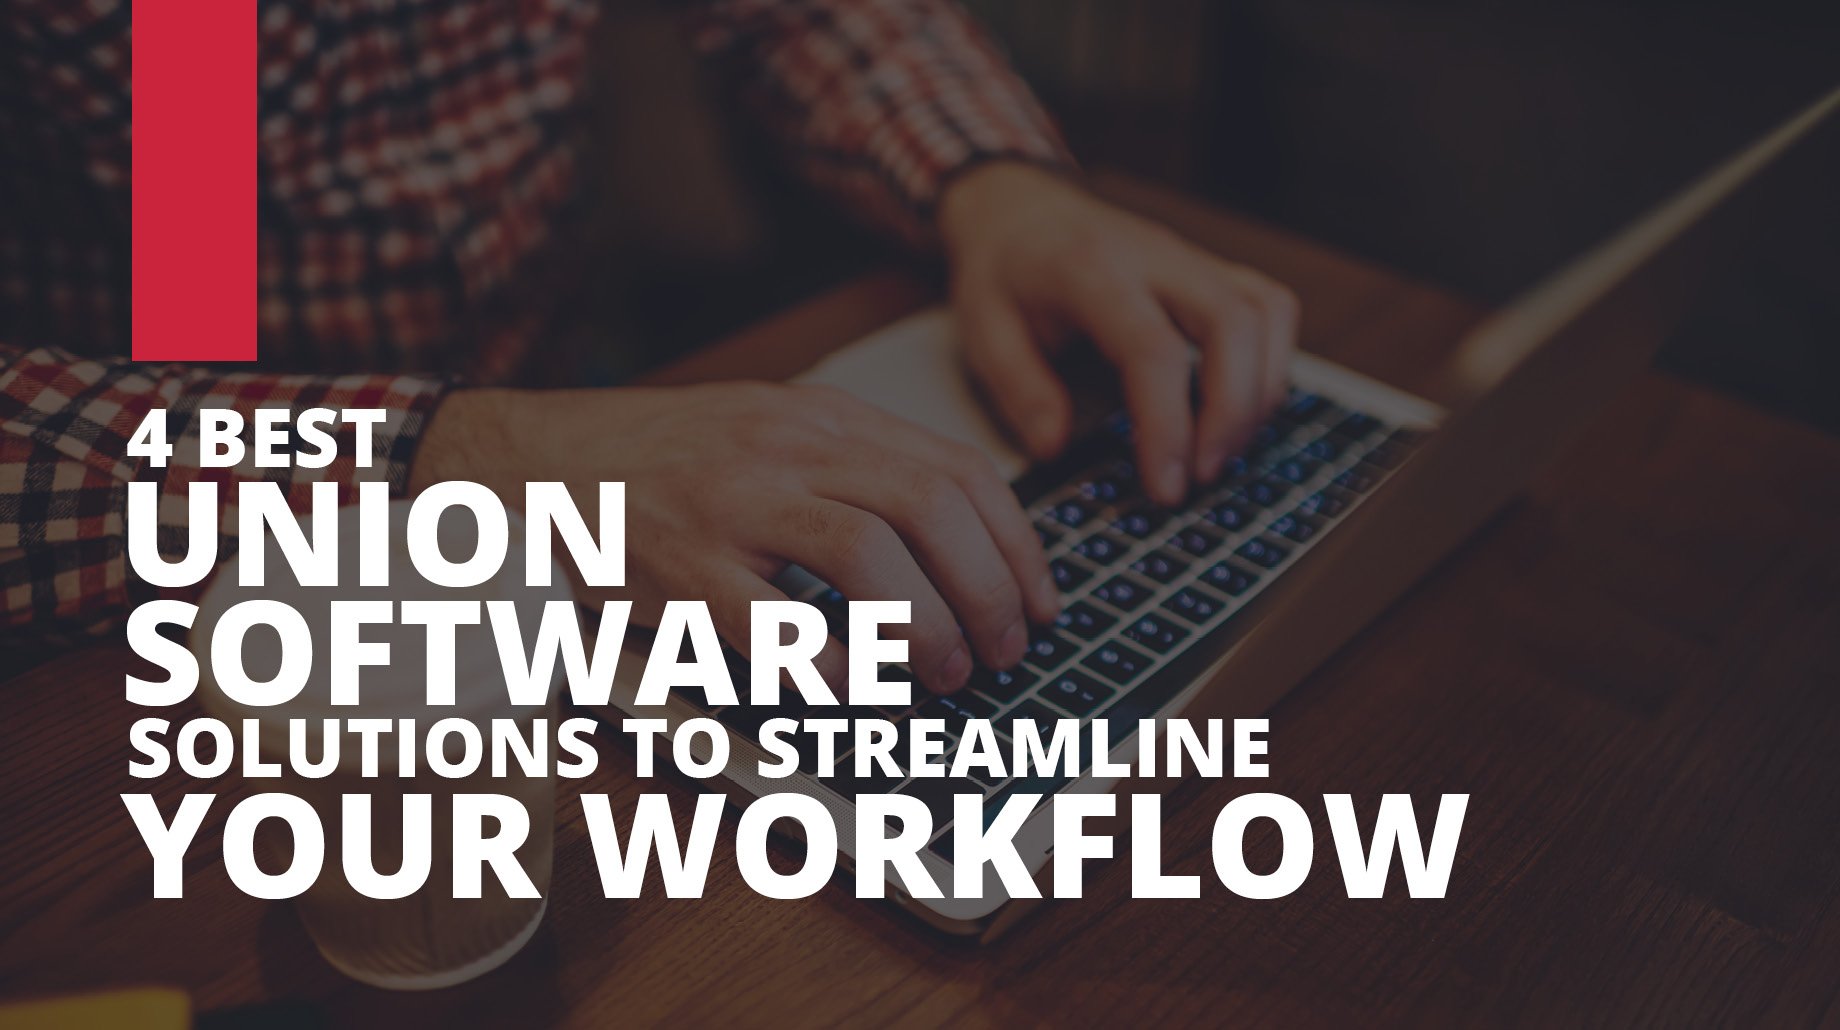 Learn about four best union software solutions to streamline your workflow in this guide.